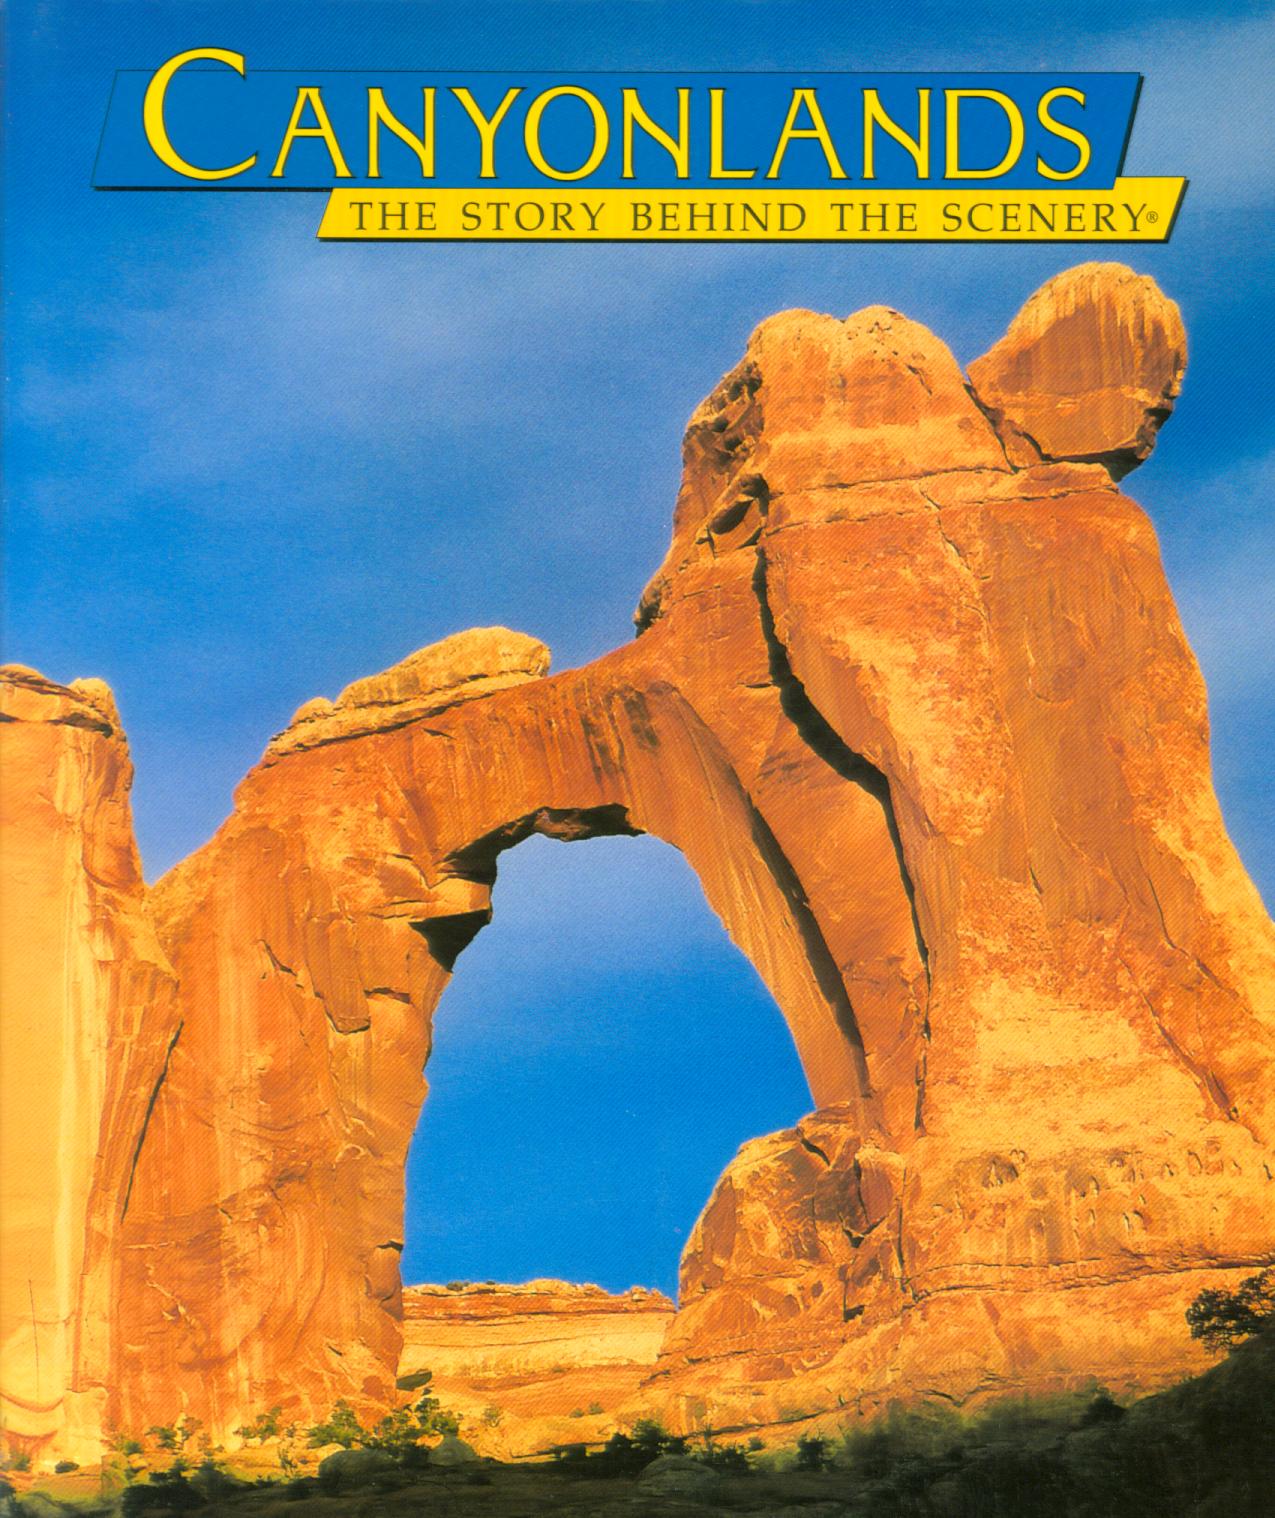 CANYONLANDS: the story behind the scenery (UT). by David Johnson. 